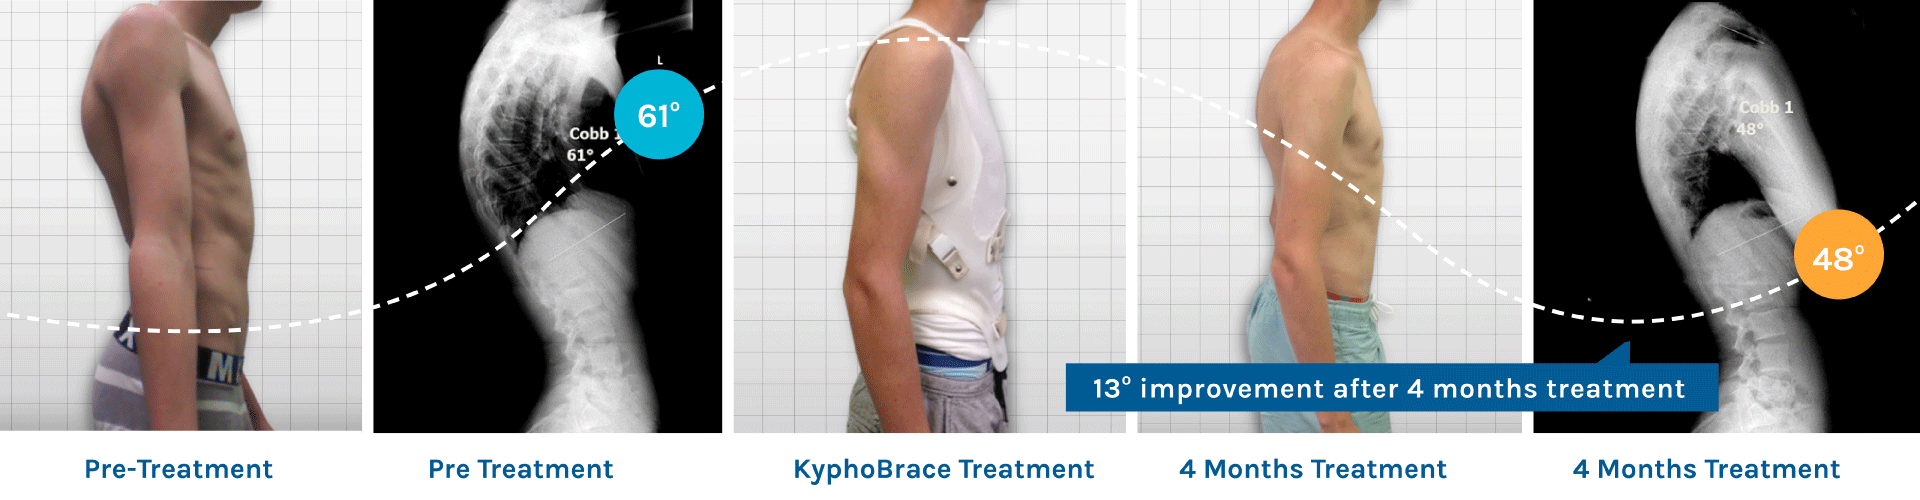 KyphoBrace is patient friendly and gets results